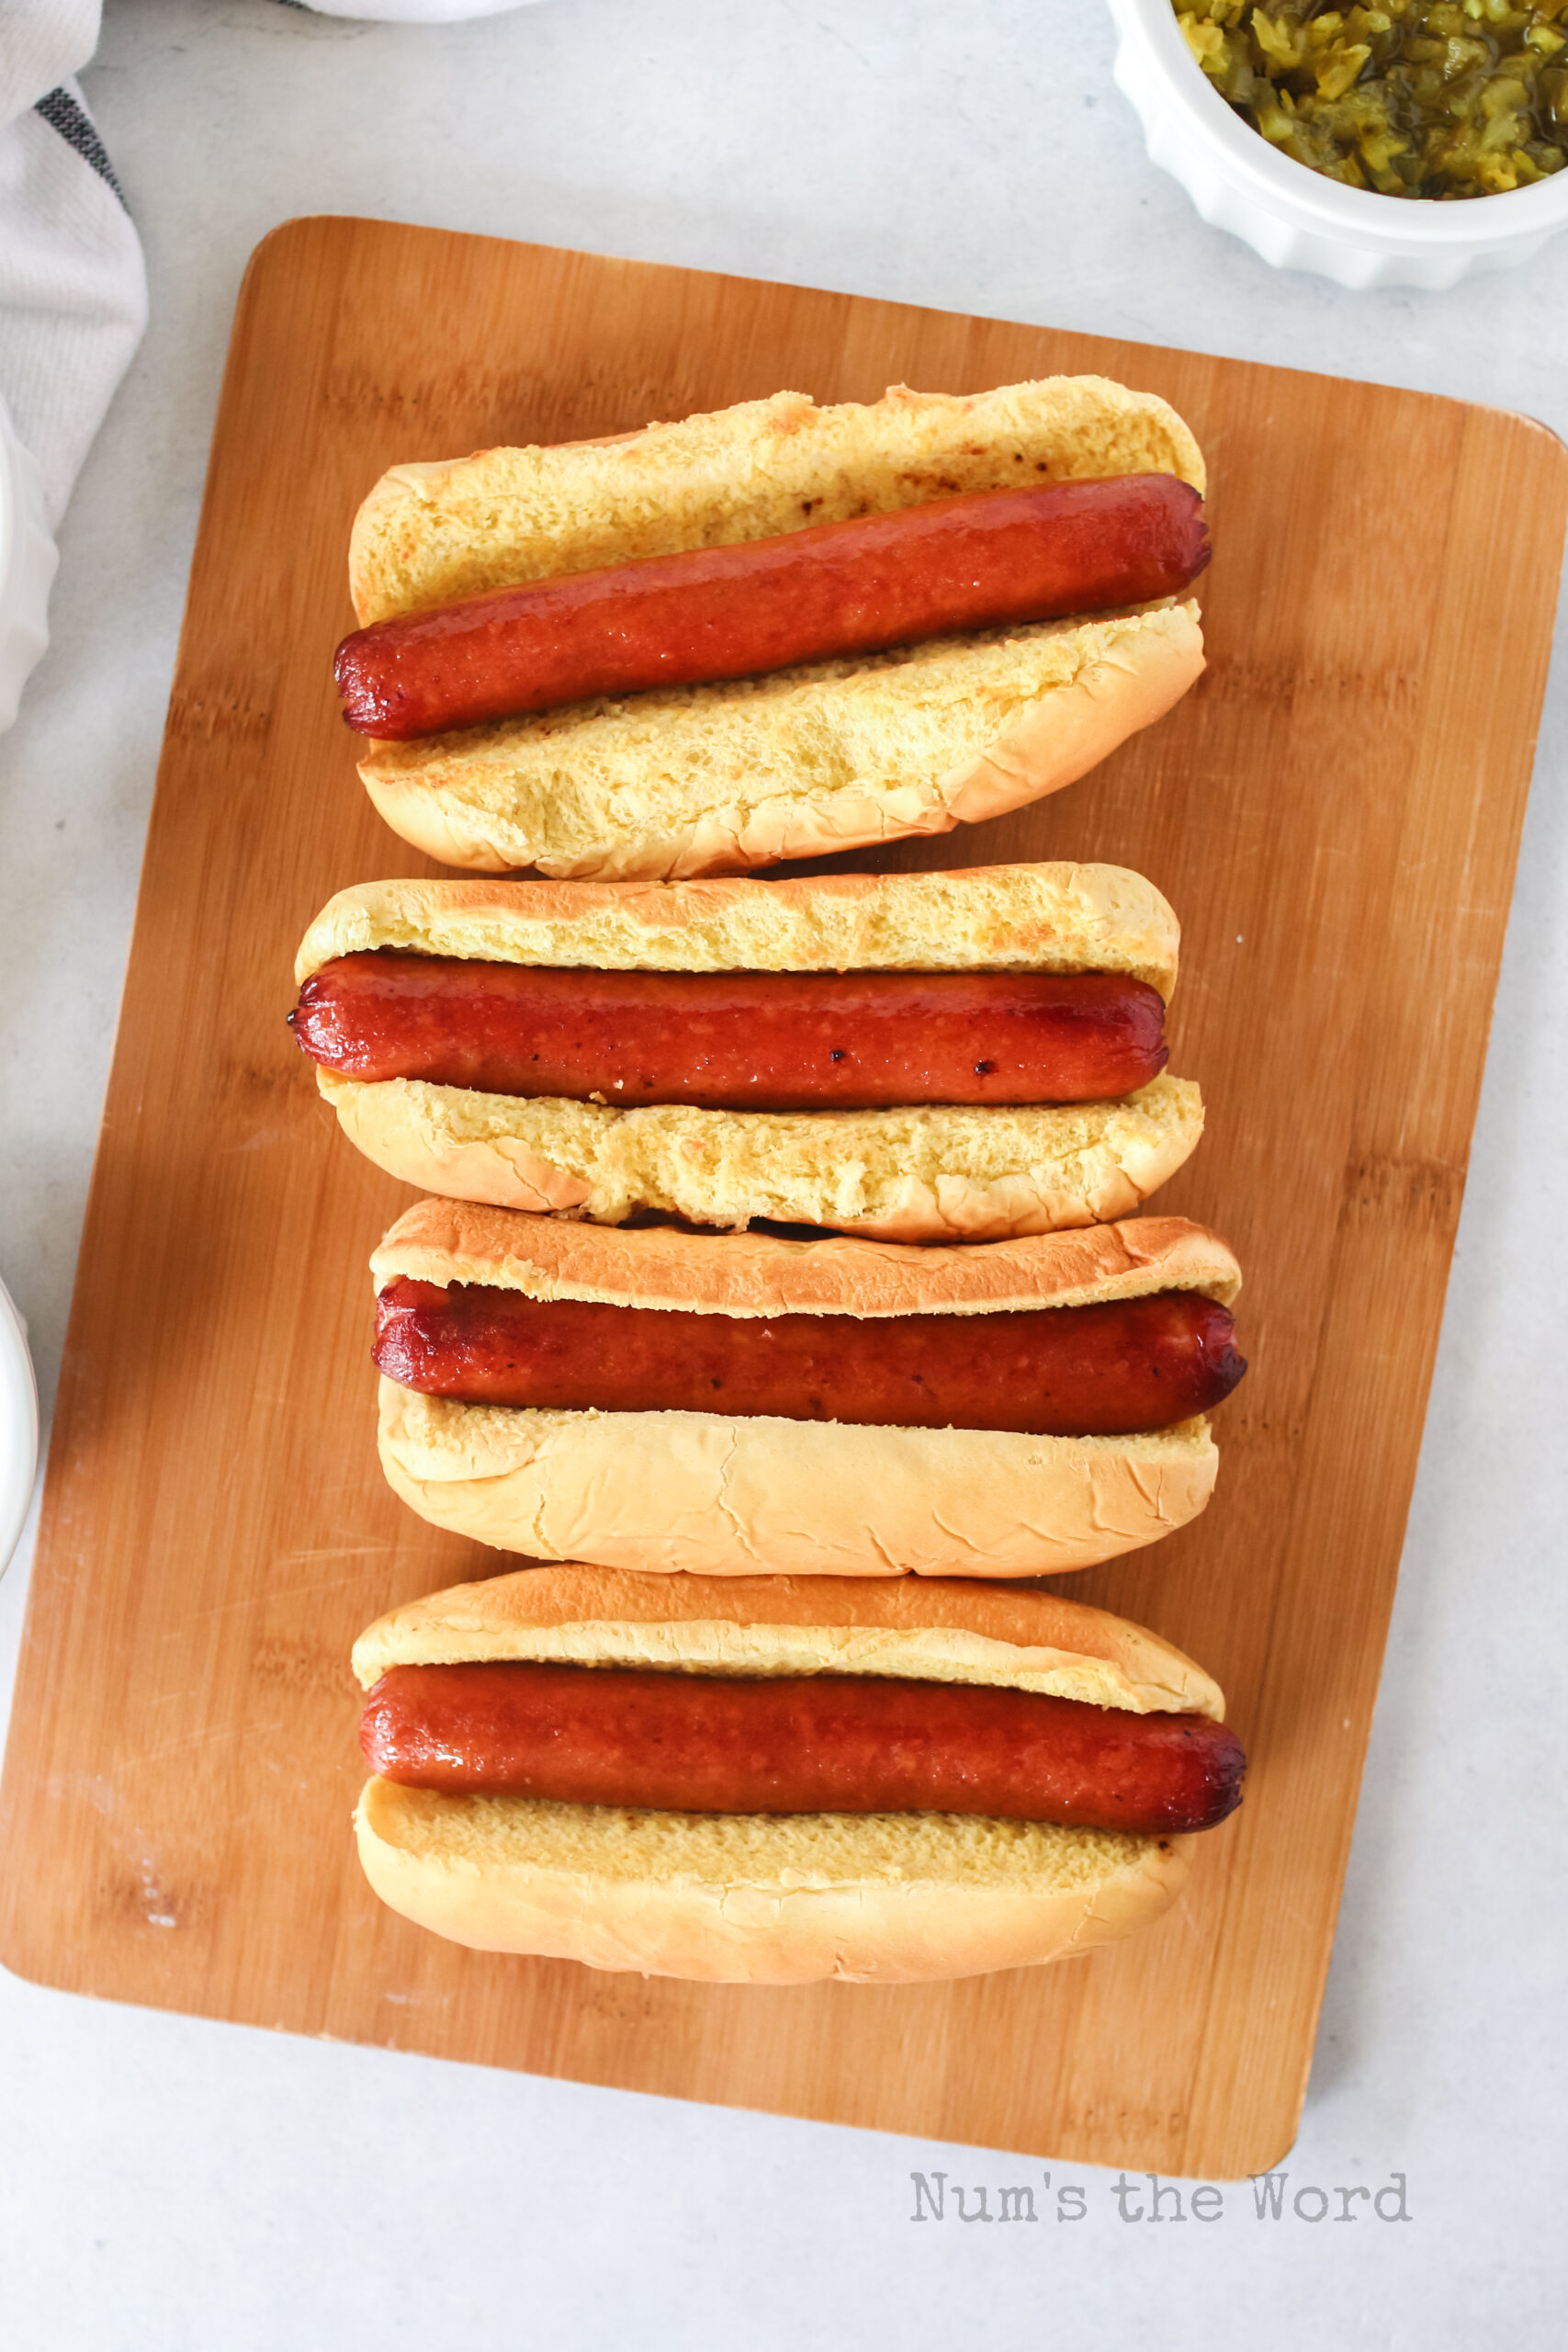 air fryer hot dogs in buns out of the air fryer.